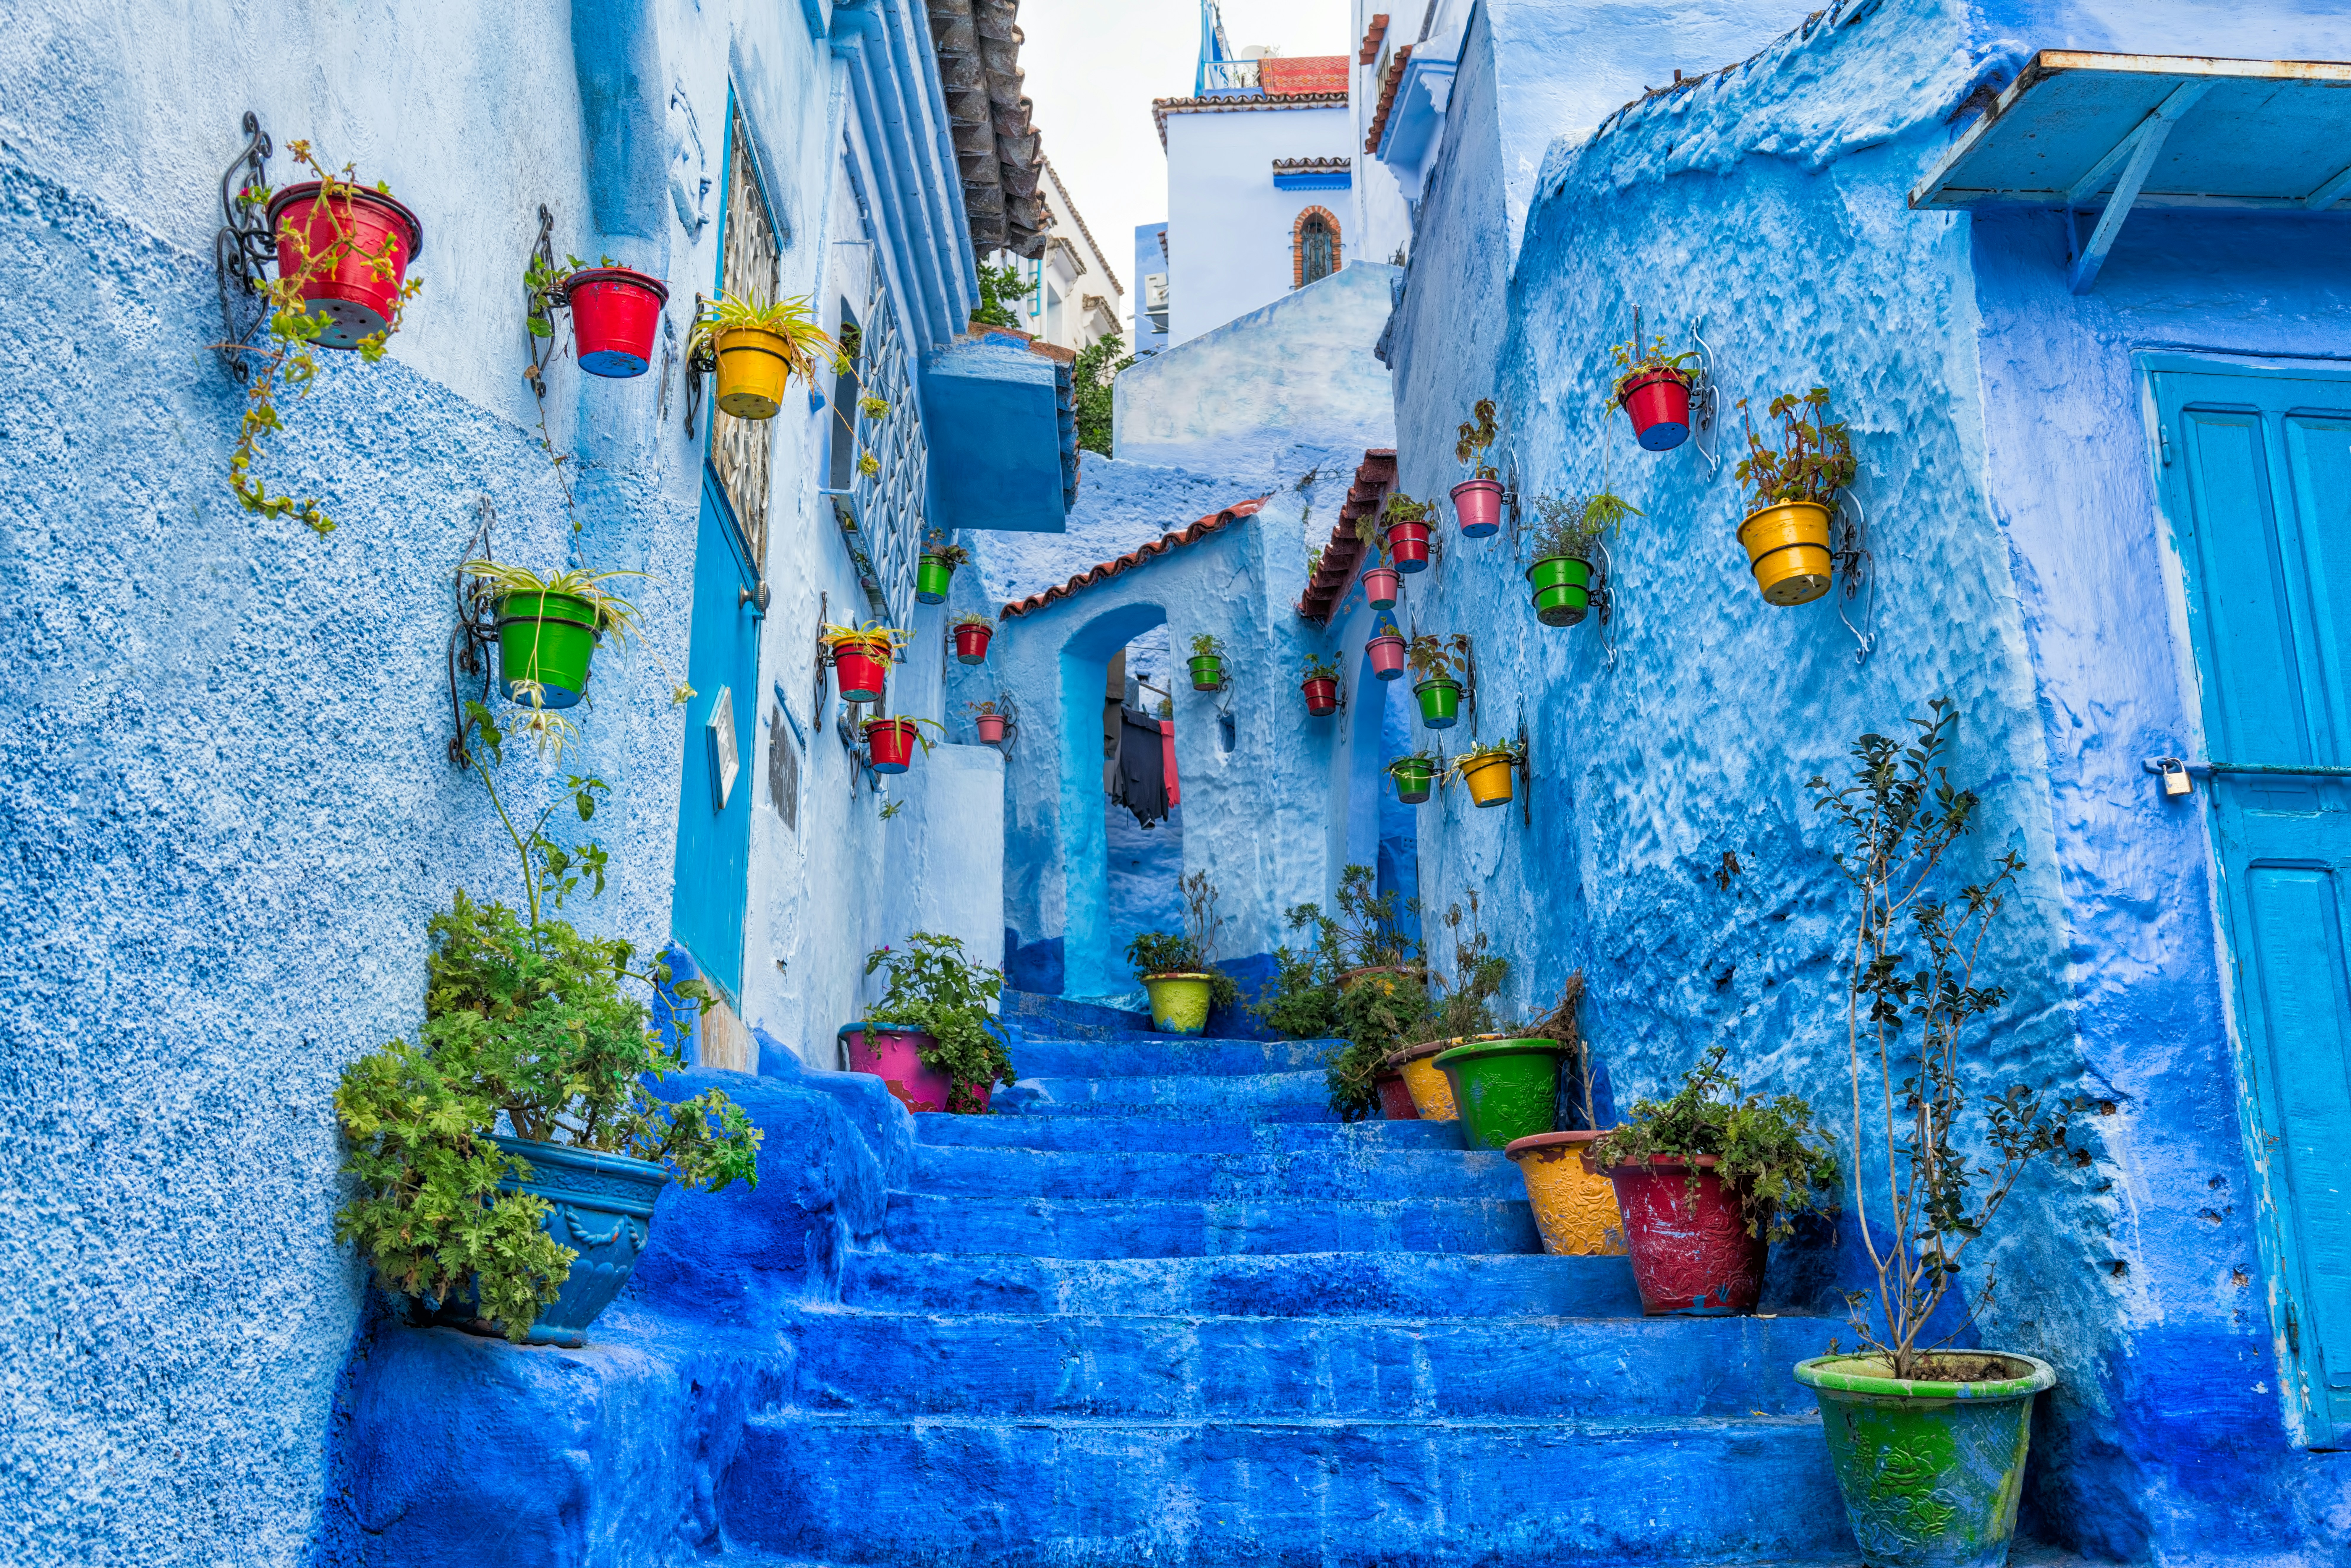 There are plenty of ways for tourists to feel safe when visiting Morocco. Check out these tips for travel. 
pictured: the famous blue buildings of Morocco 